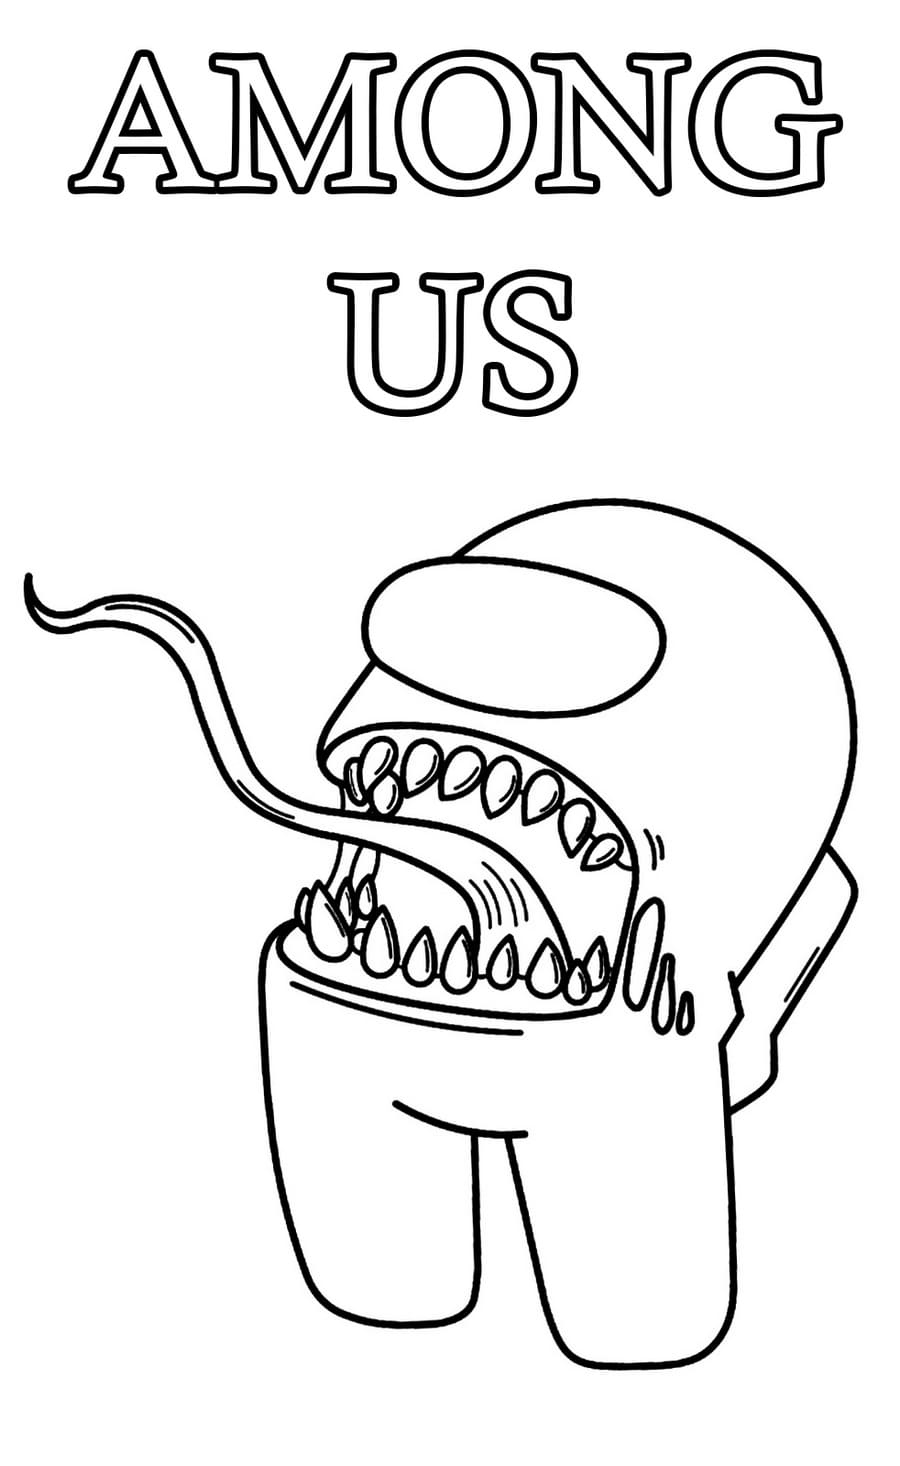 Among Us Imposter Coloring Pages   Print new Coloring Pages